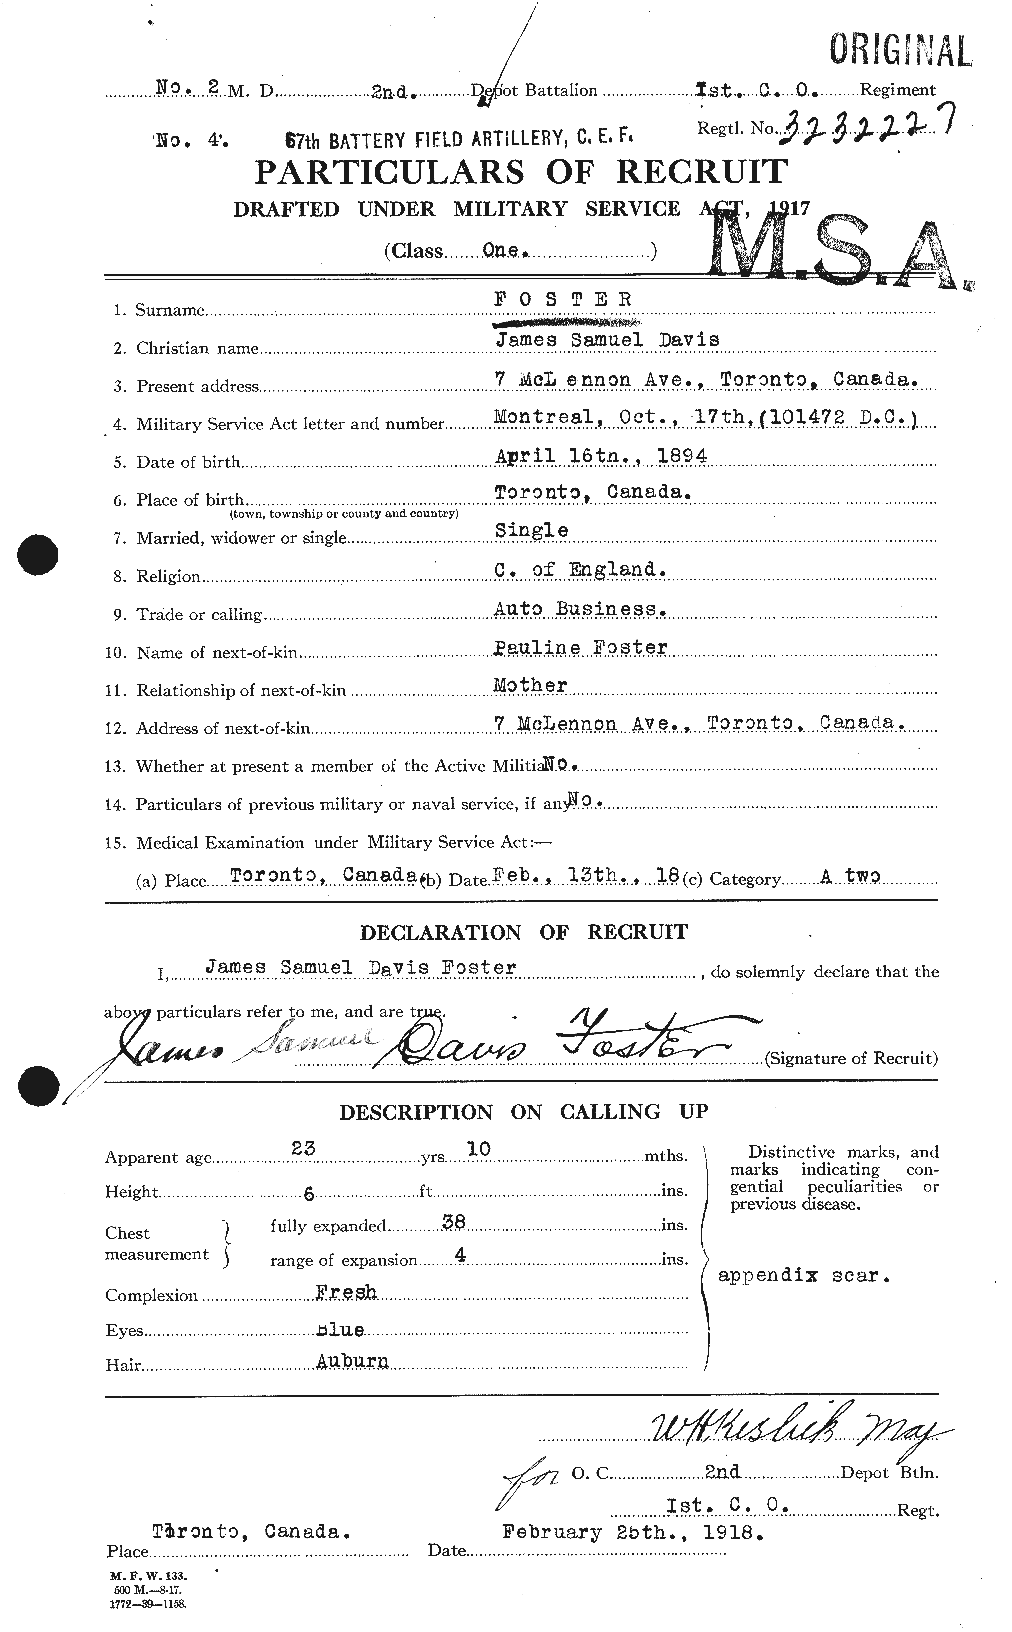 Personnel Records of the First World War - CEF 333318a